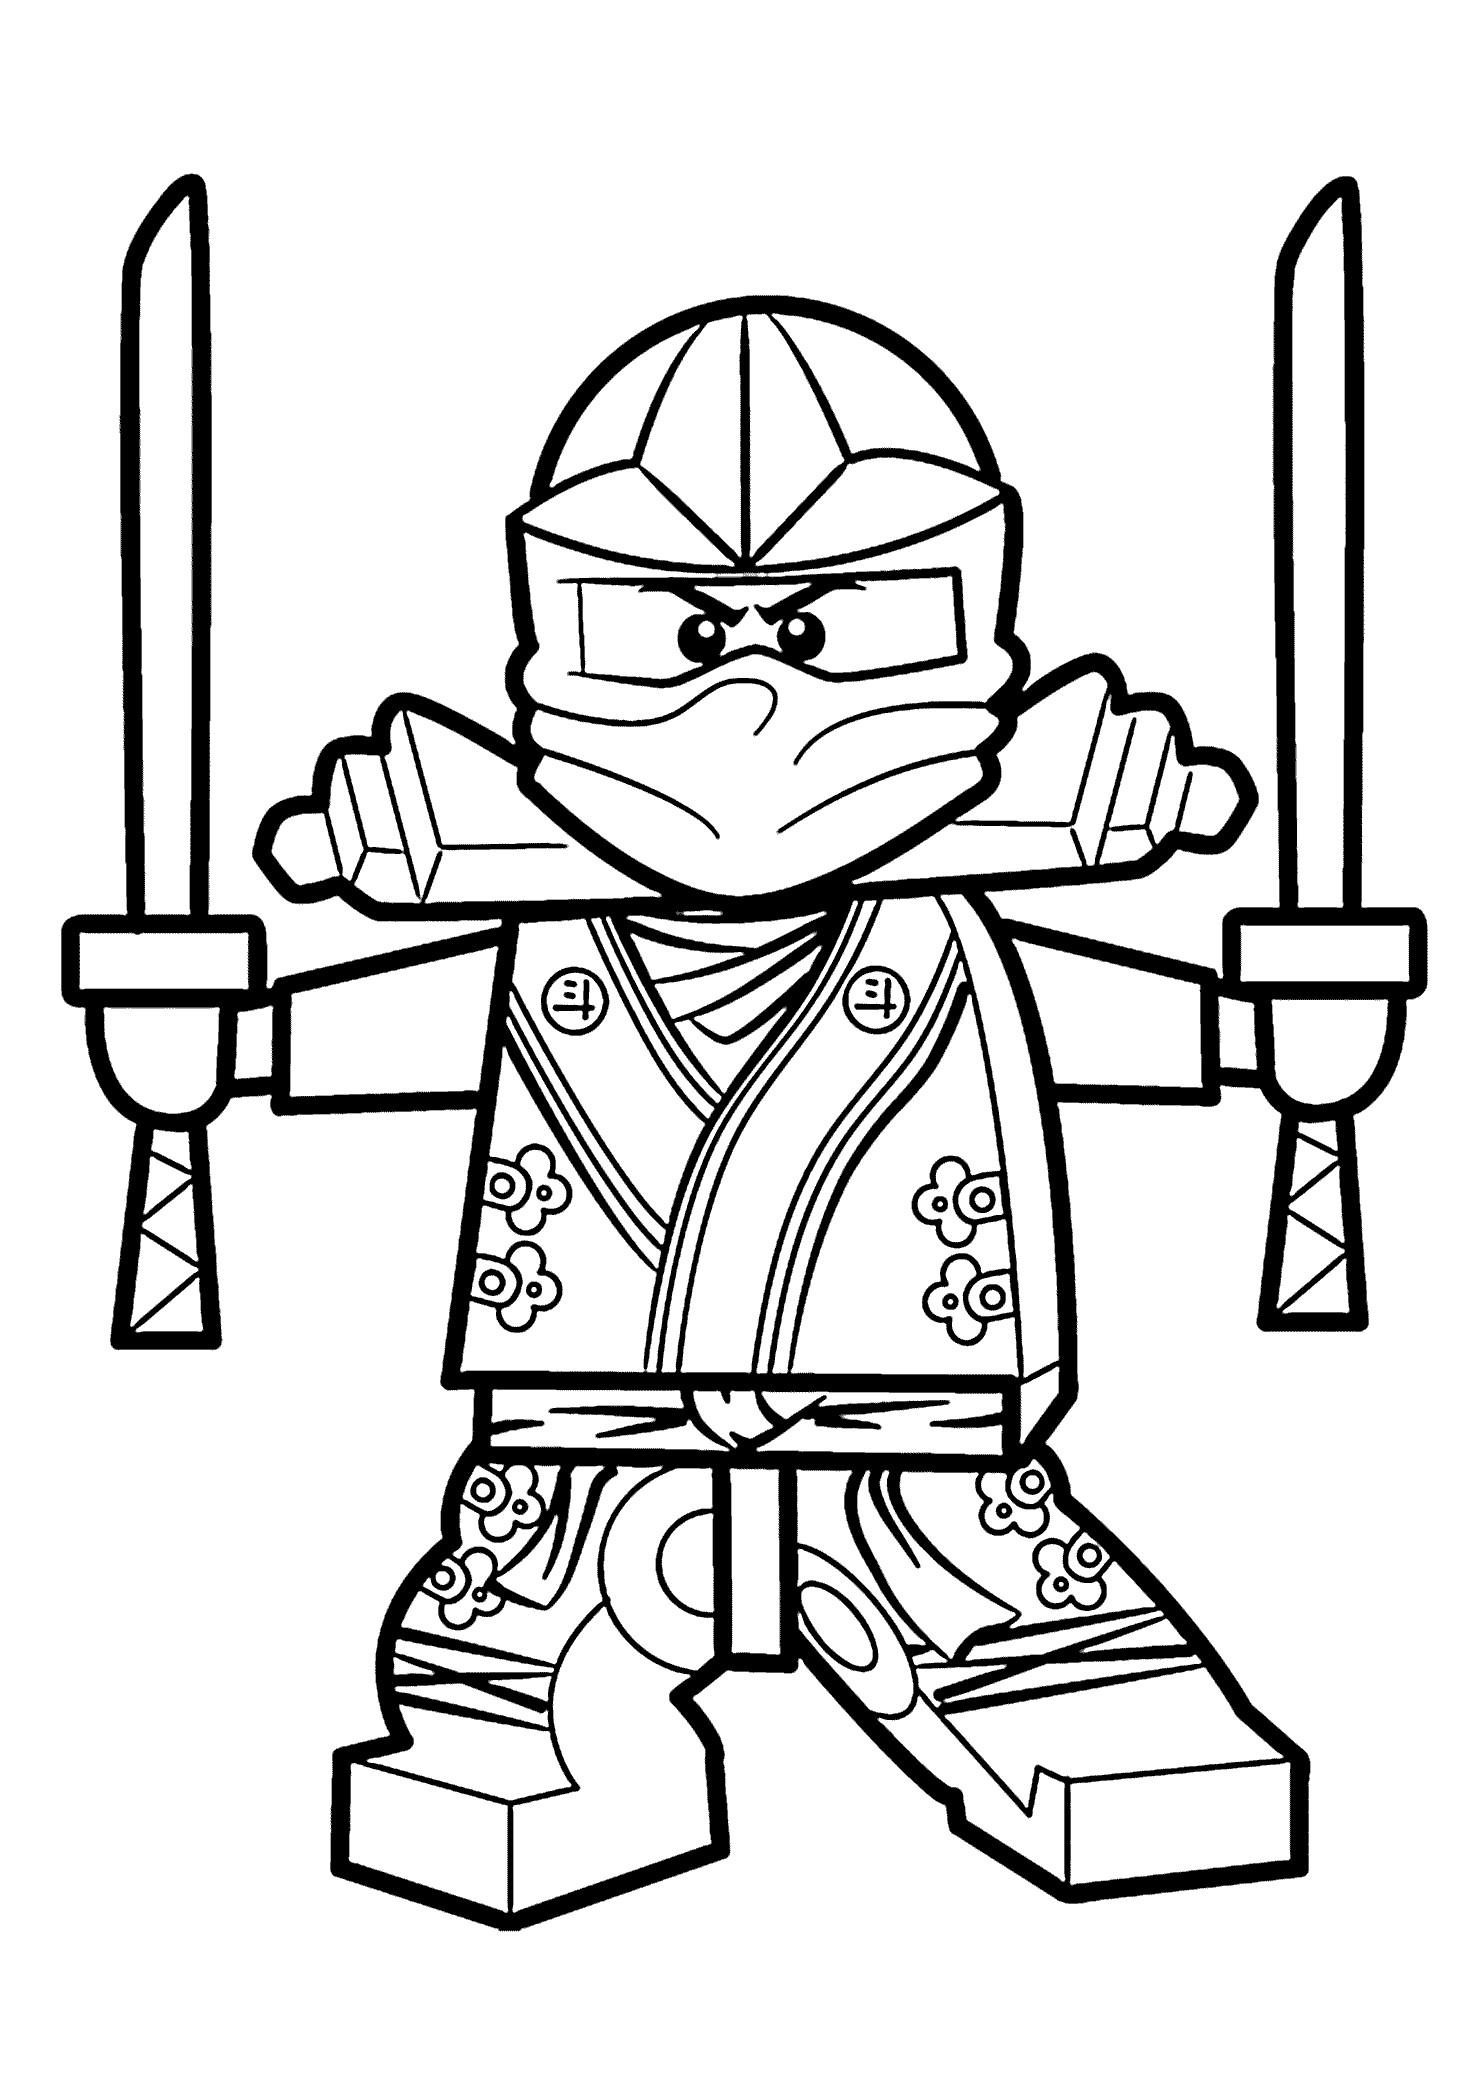 Coloring Pages For Kids Lego
 Lego Coloring Pages Best Coloring Pages For Kids